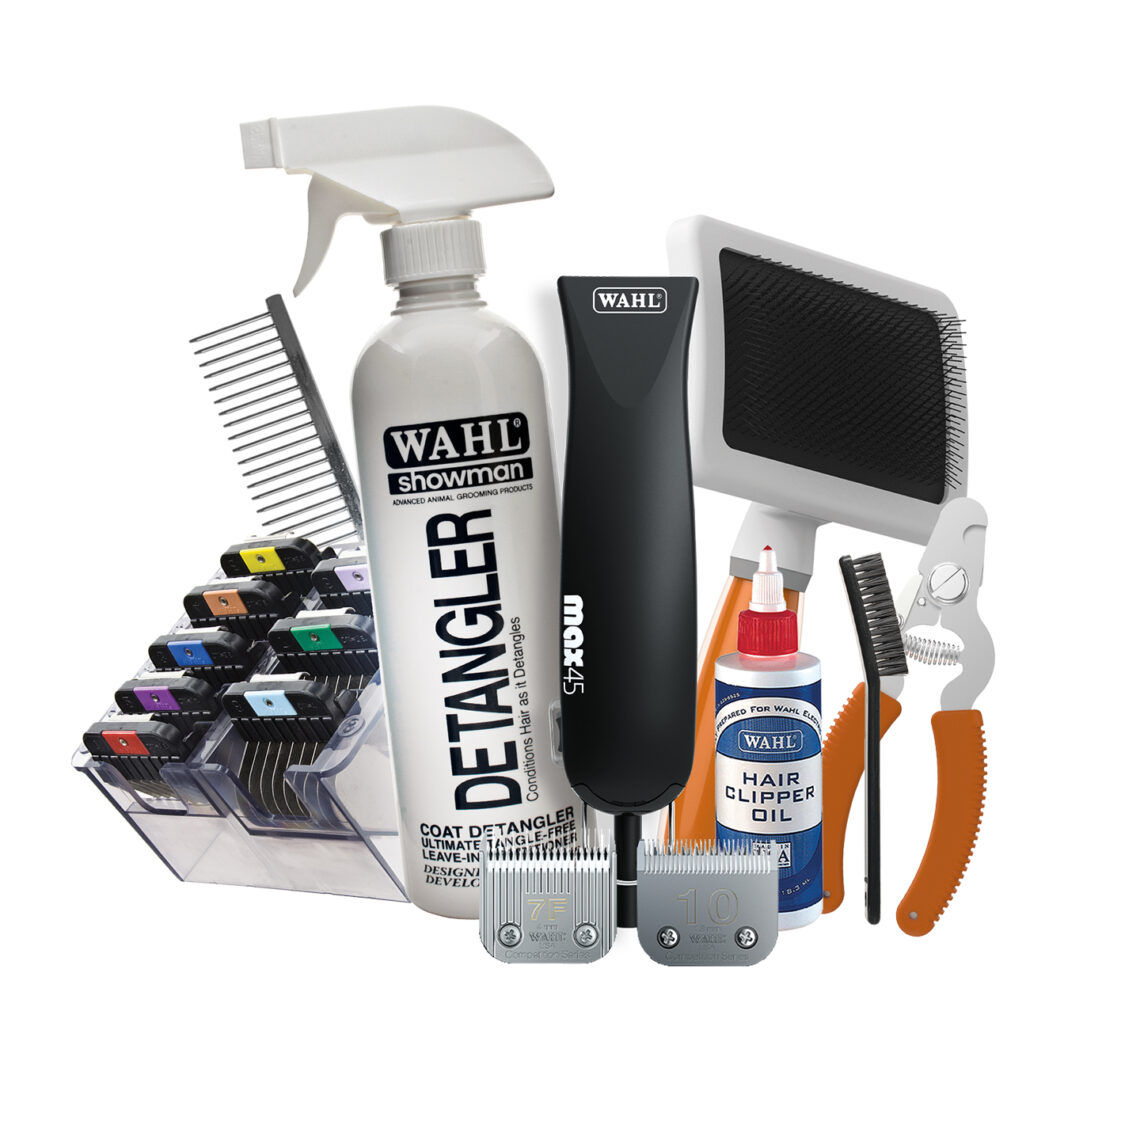 professional grooming products